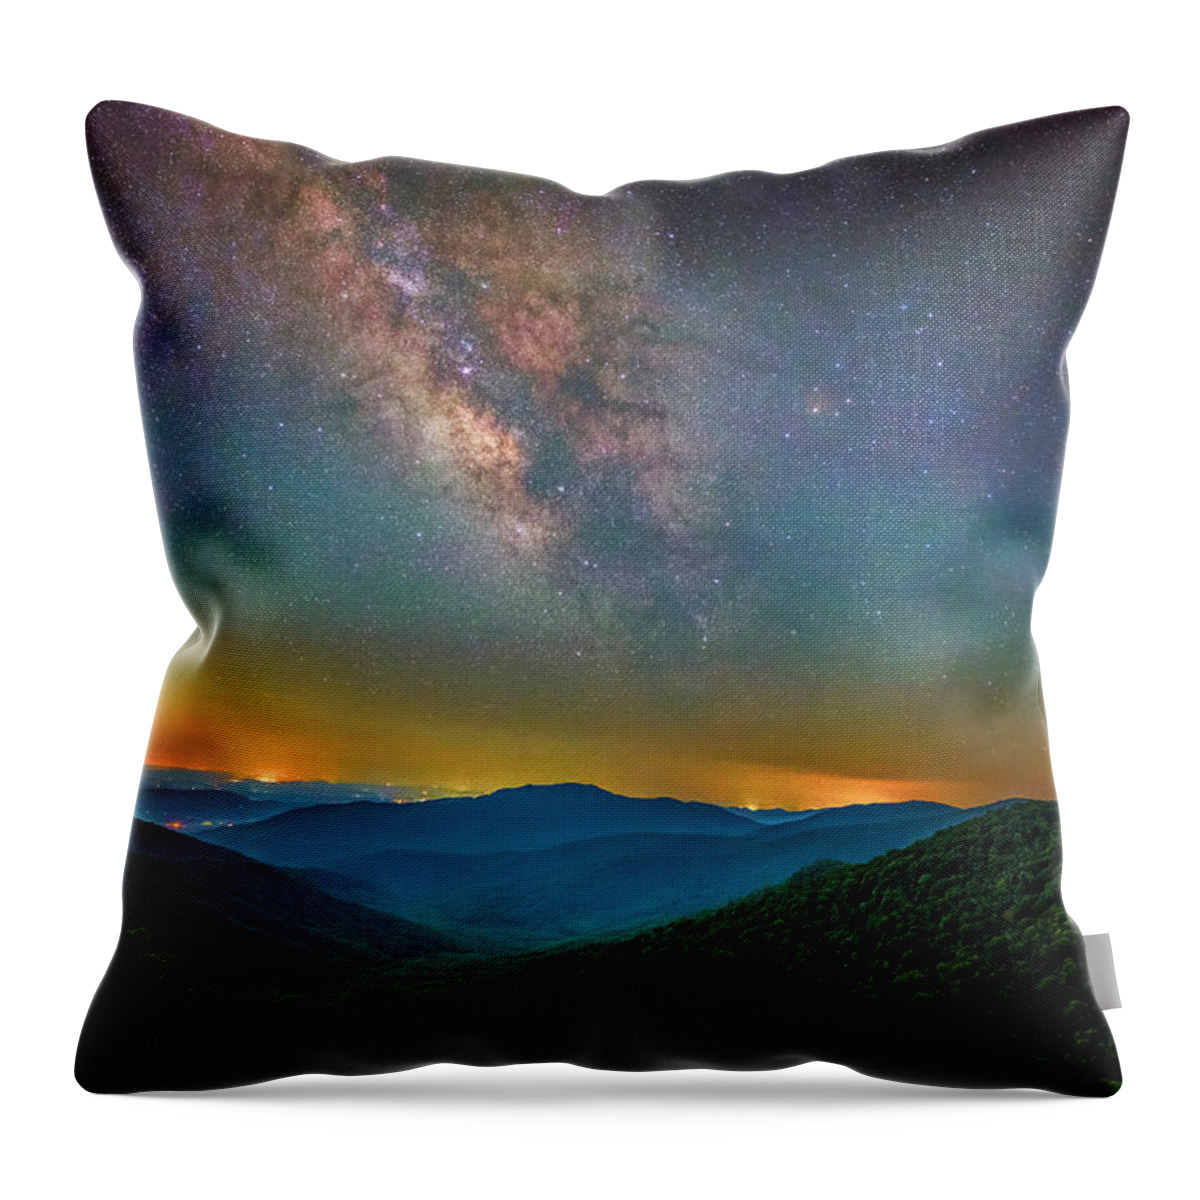 The Milky Way Over Shenandoah Throw Pillow featuring the photograph The Milky Way Over Shenandoah by Mark Papke